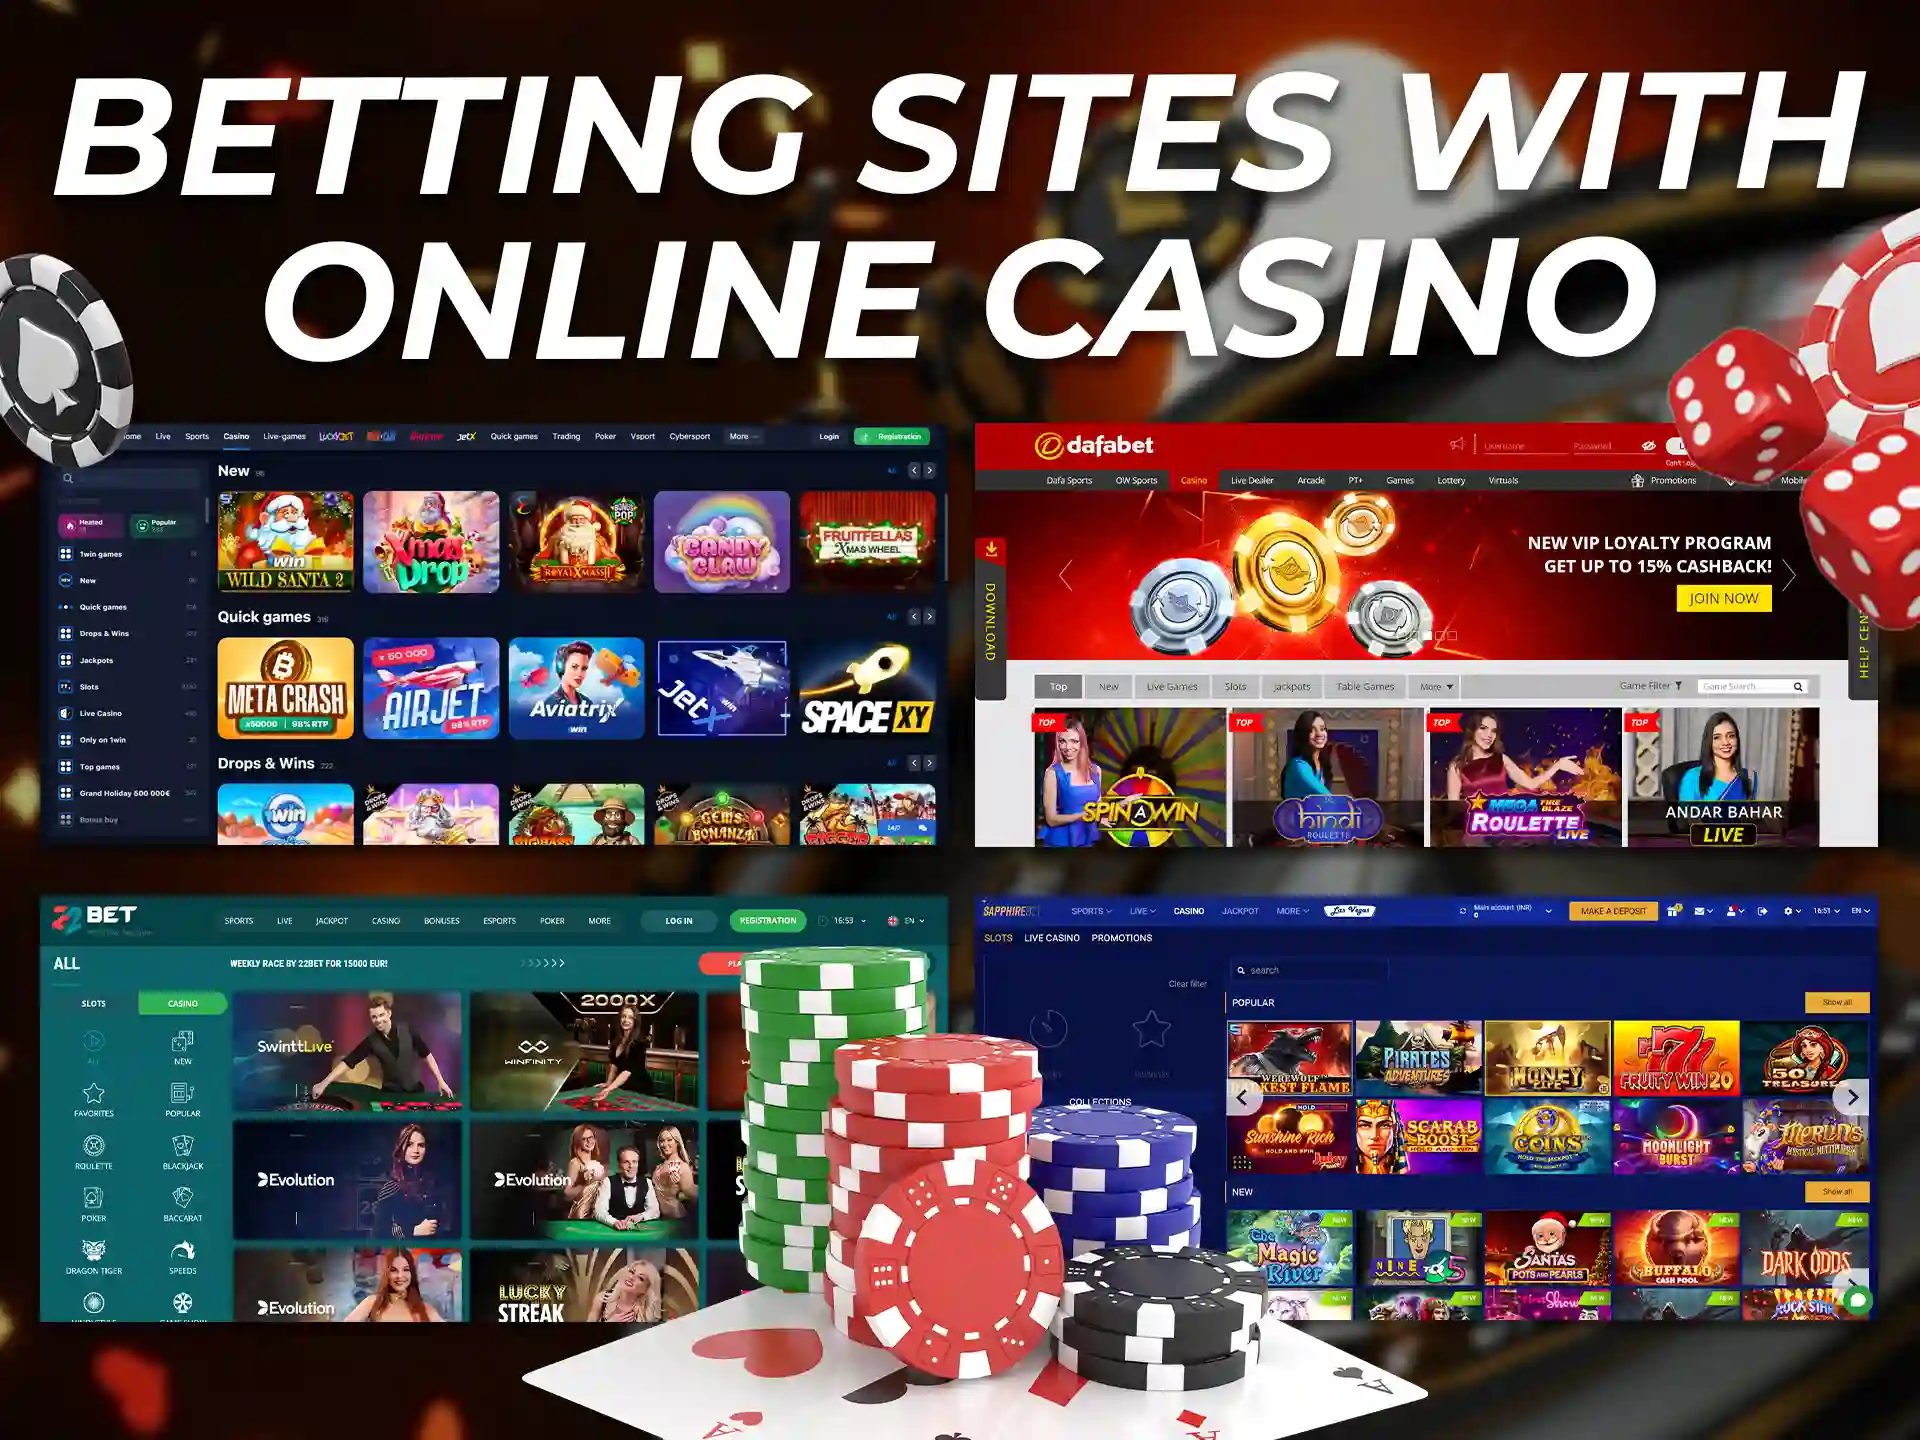 In addition to sports betting, many sites provide players with access to online casinos.